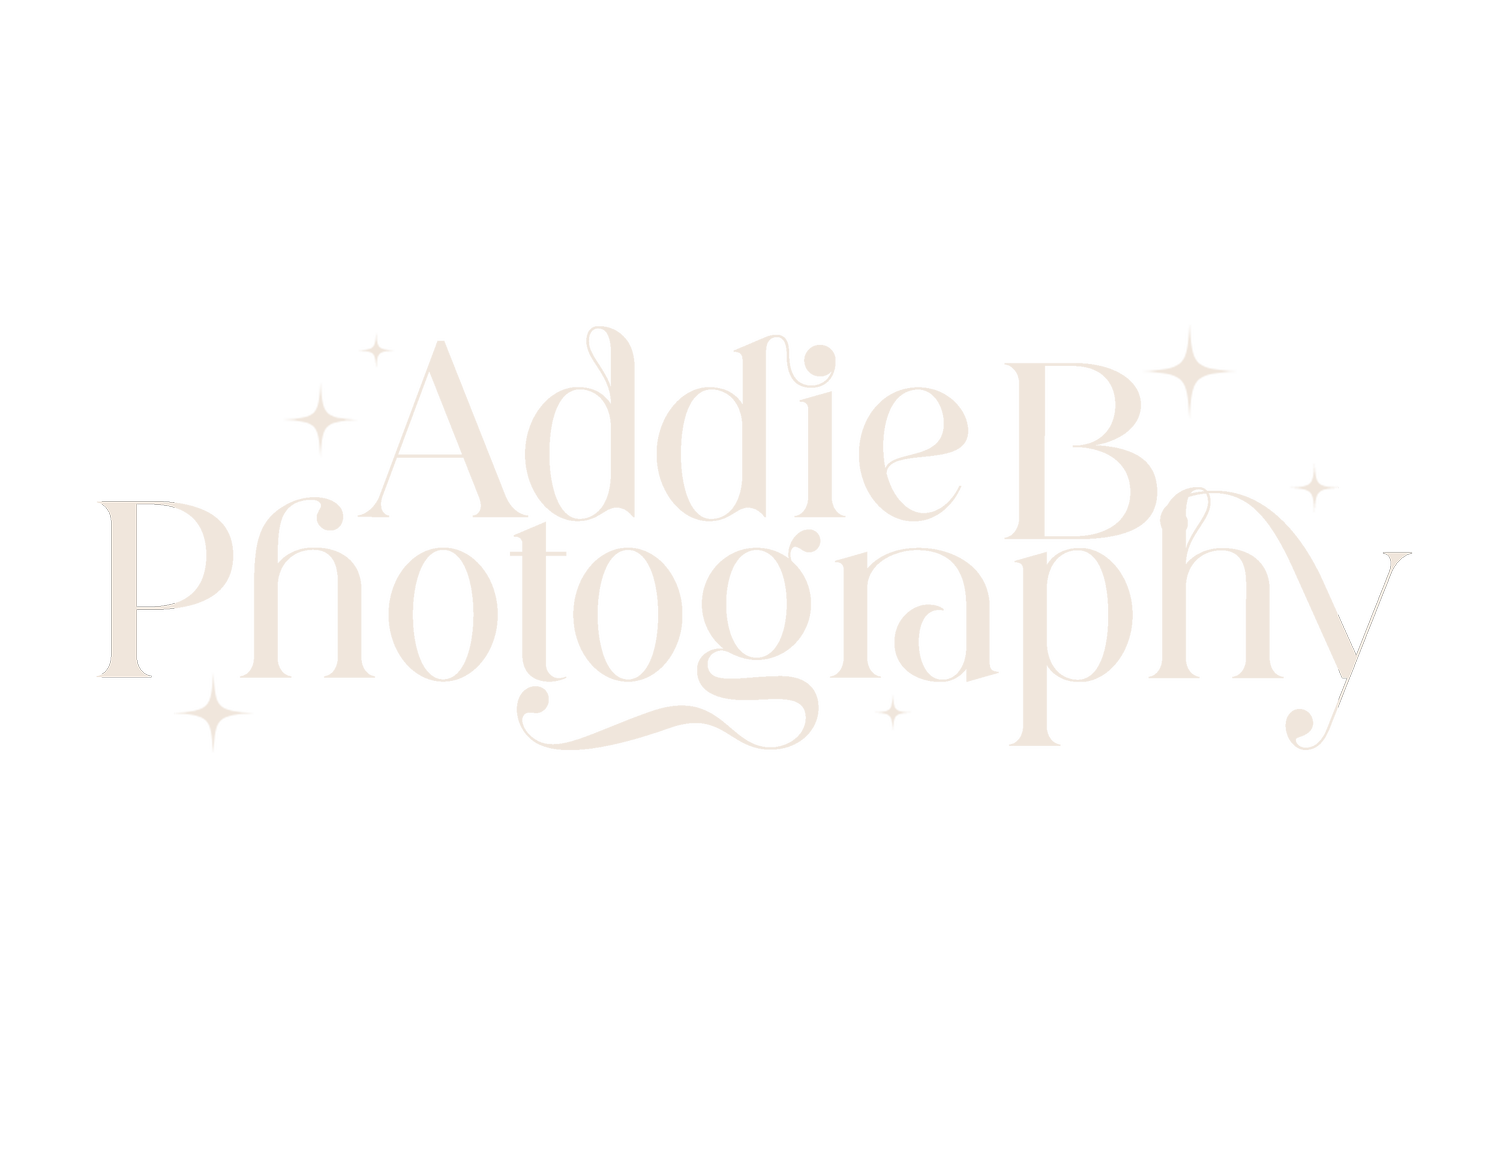 Addie B Photography - Southern California Photographer